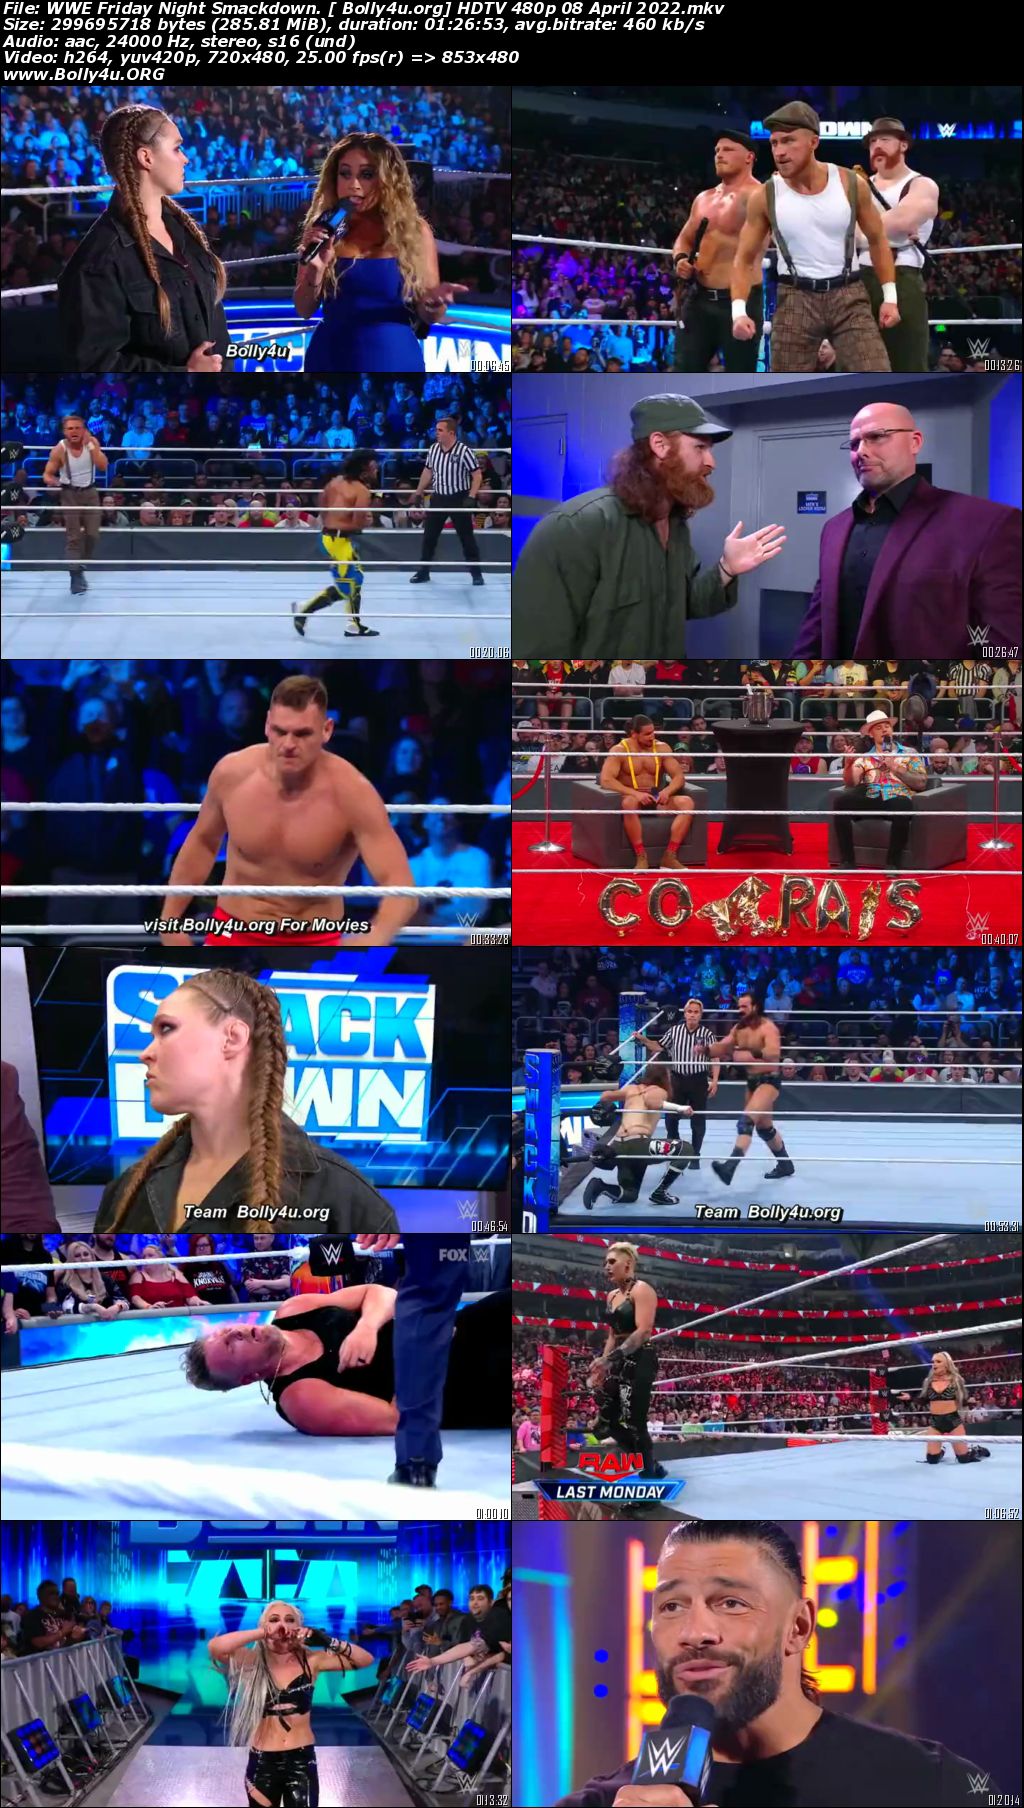 WWE Friday Night Smackdown HDTV 480p 280Mb 08 April 2022 Download